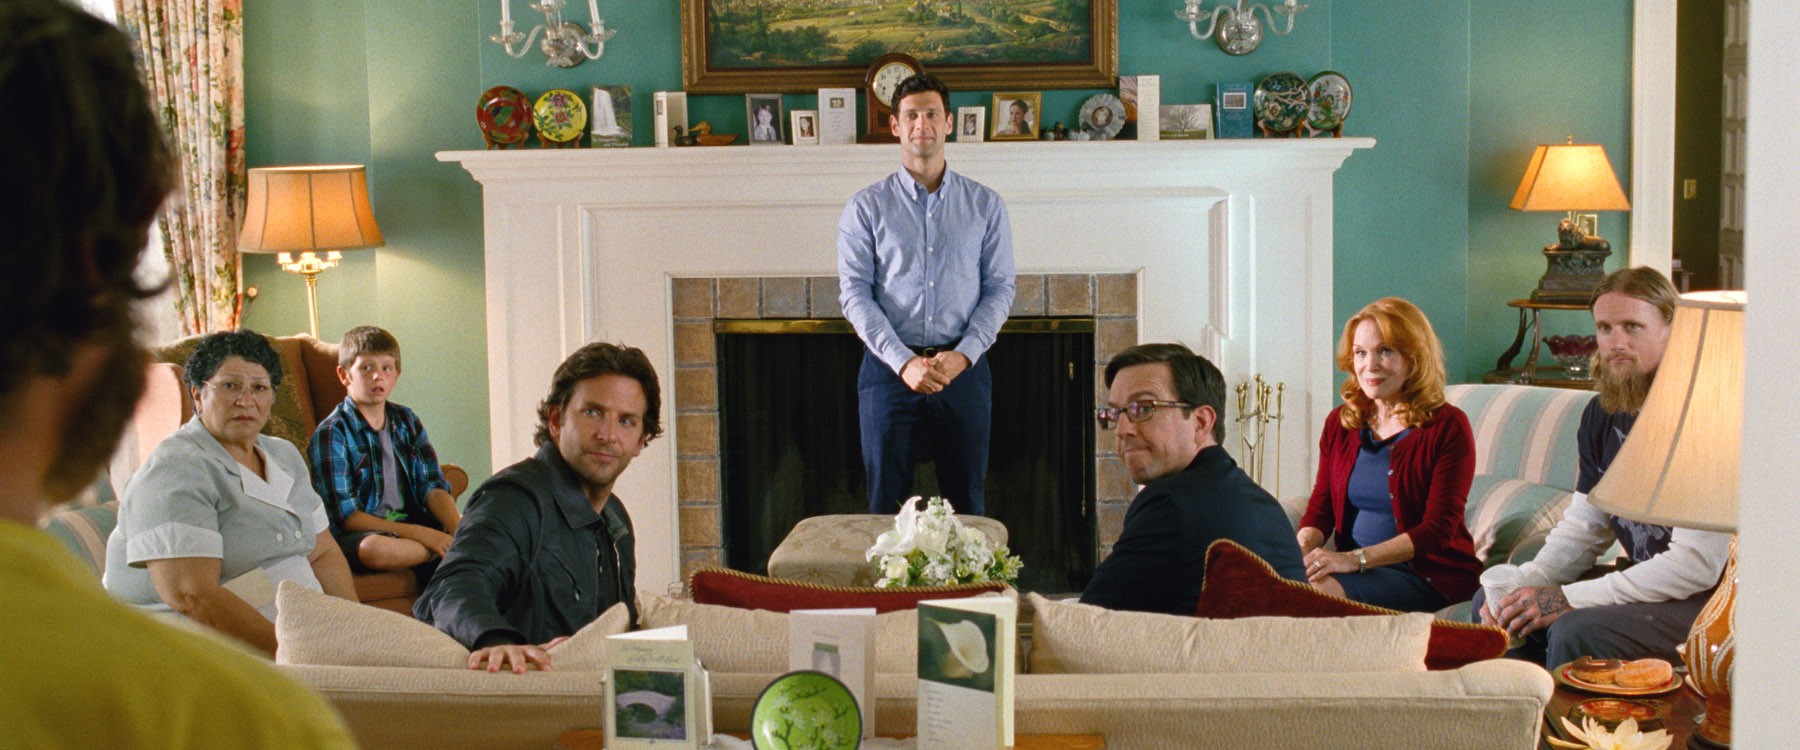 Bradley Cooper, Justin Bartha and Ed Helms in Warner Bros. Pictures' The Hangover Part III (2013)